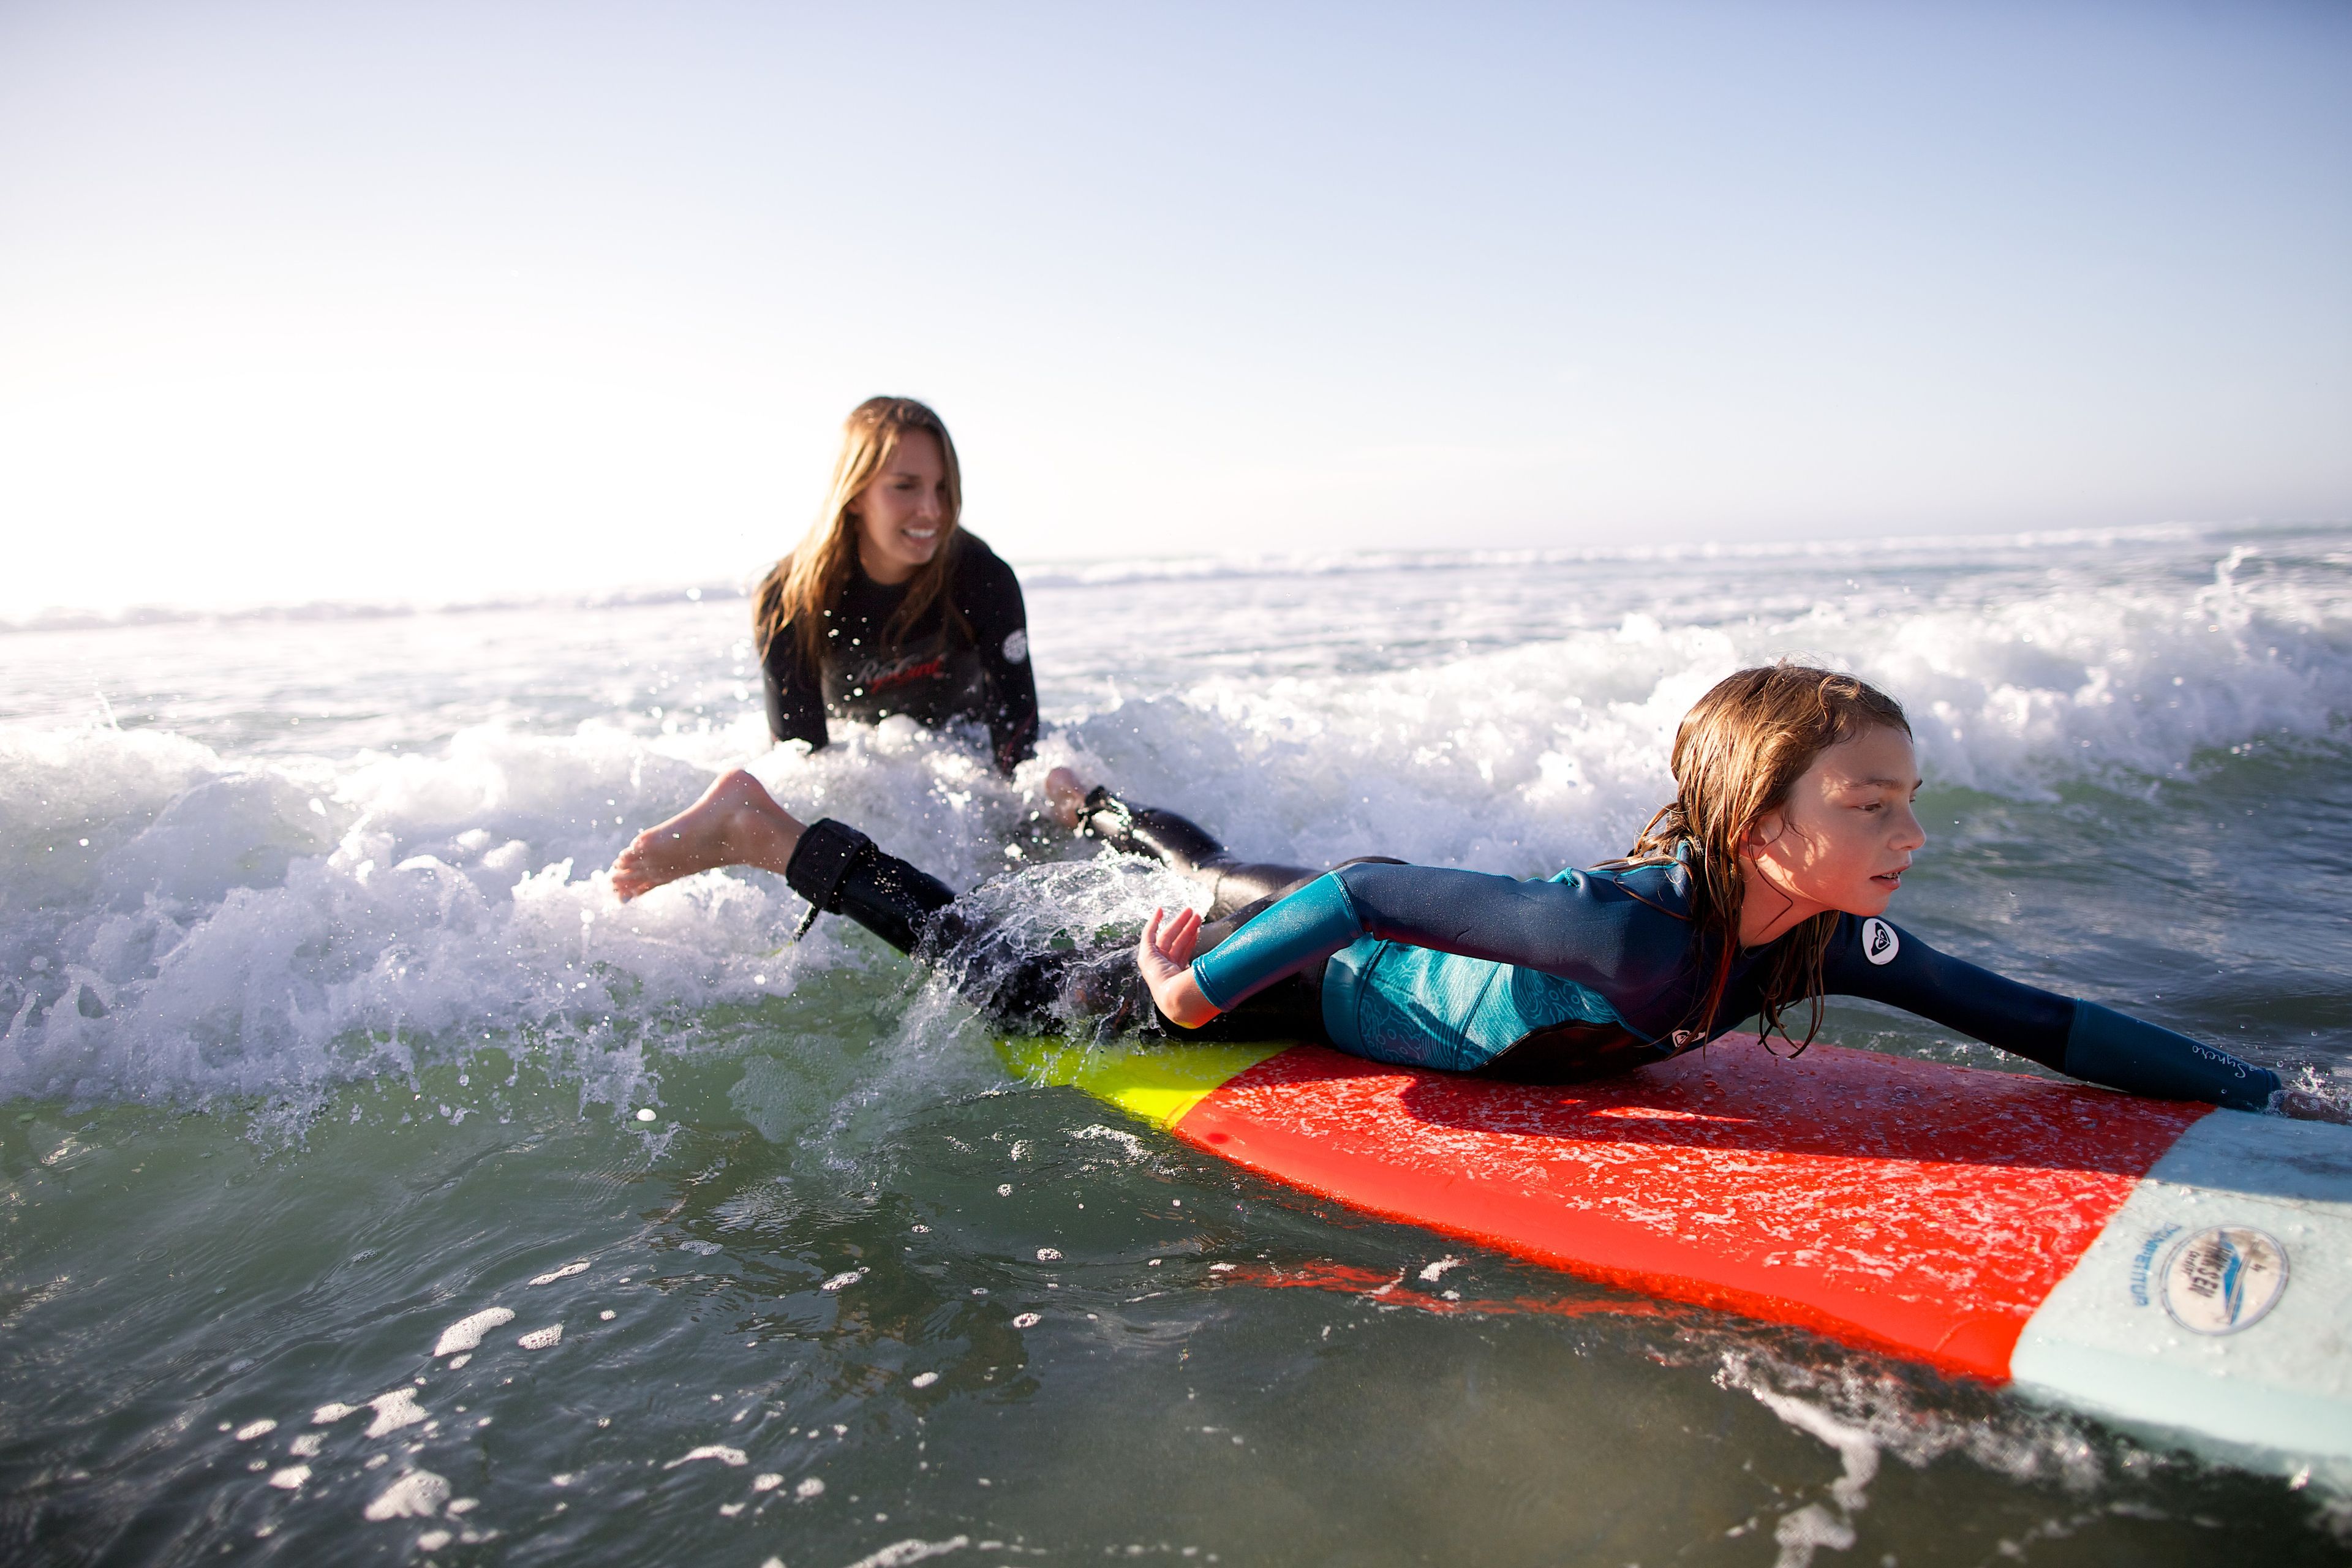 A mother and daughter go surfing together.